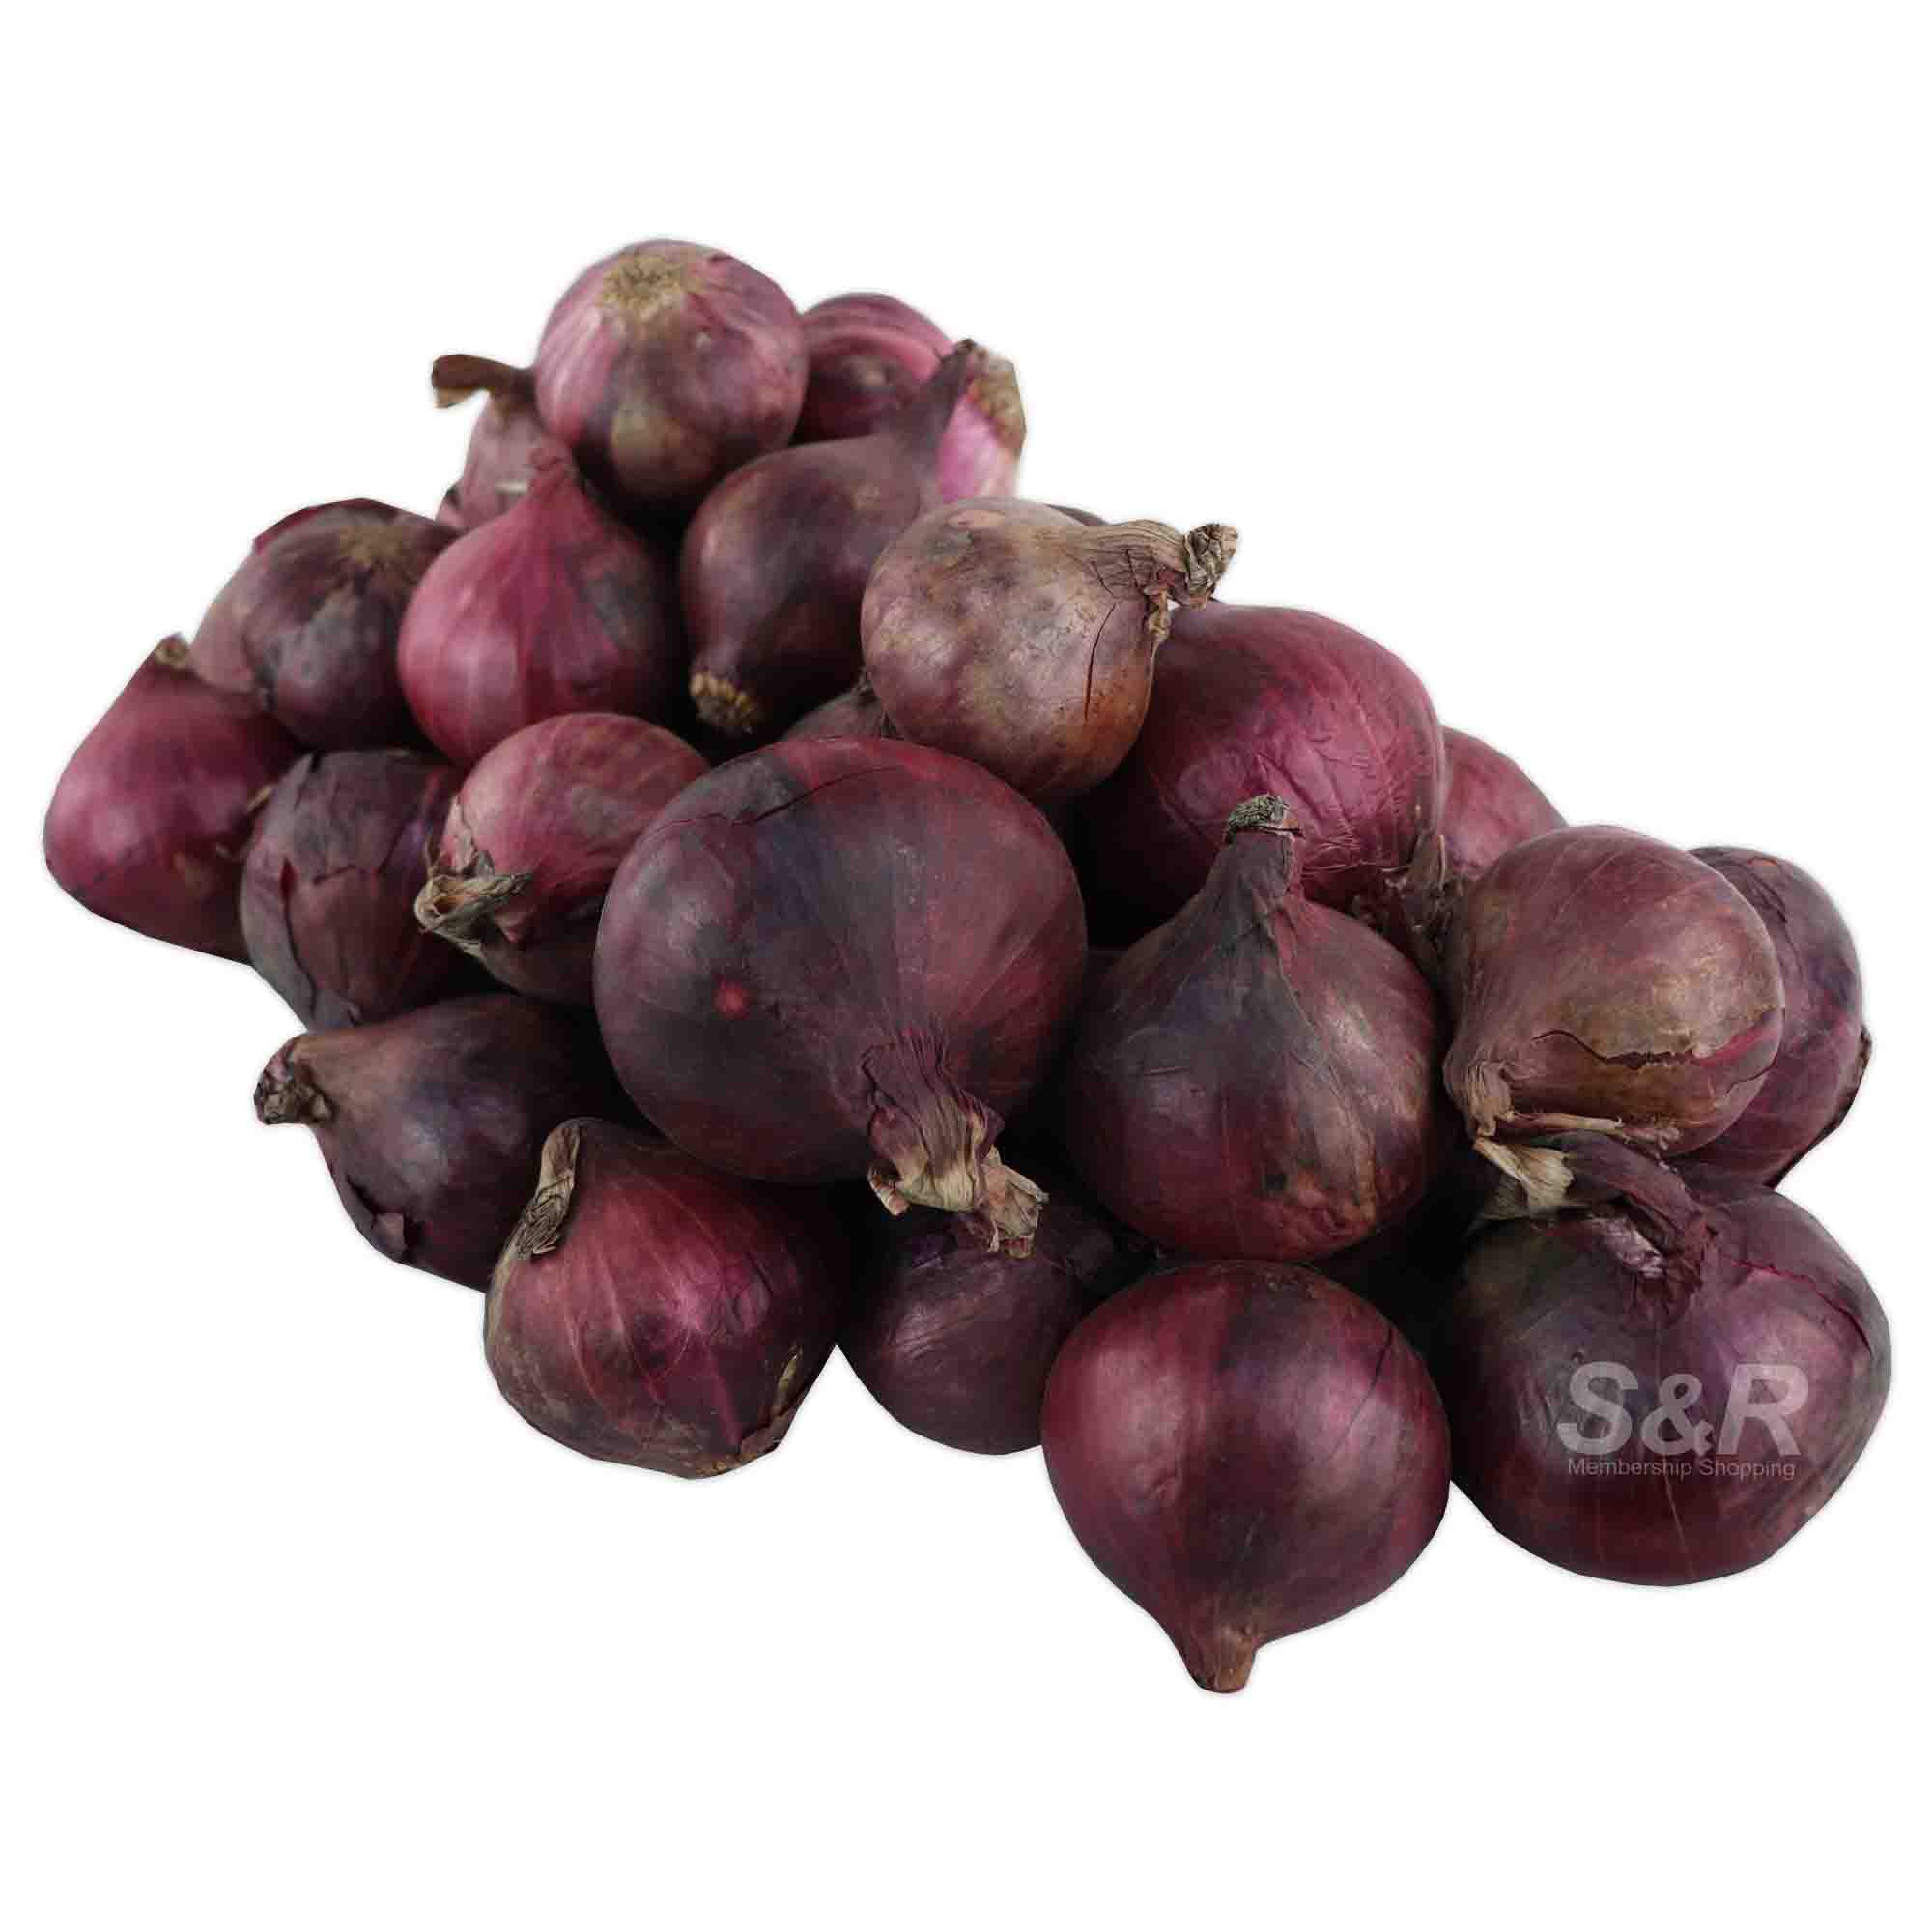 S&R Red Onion approx. 1.5kg